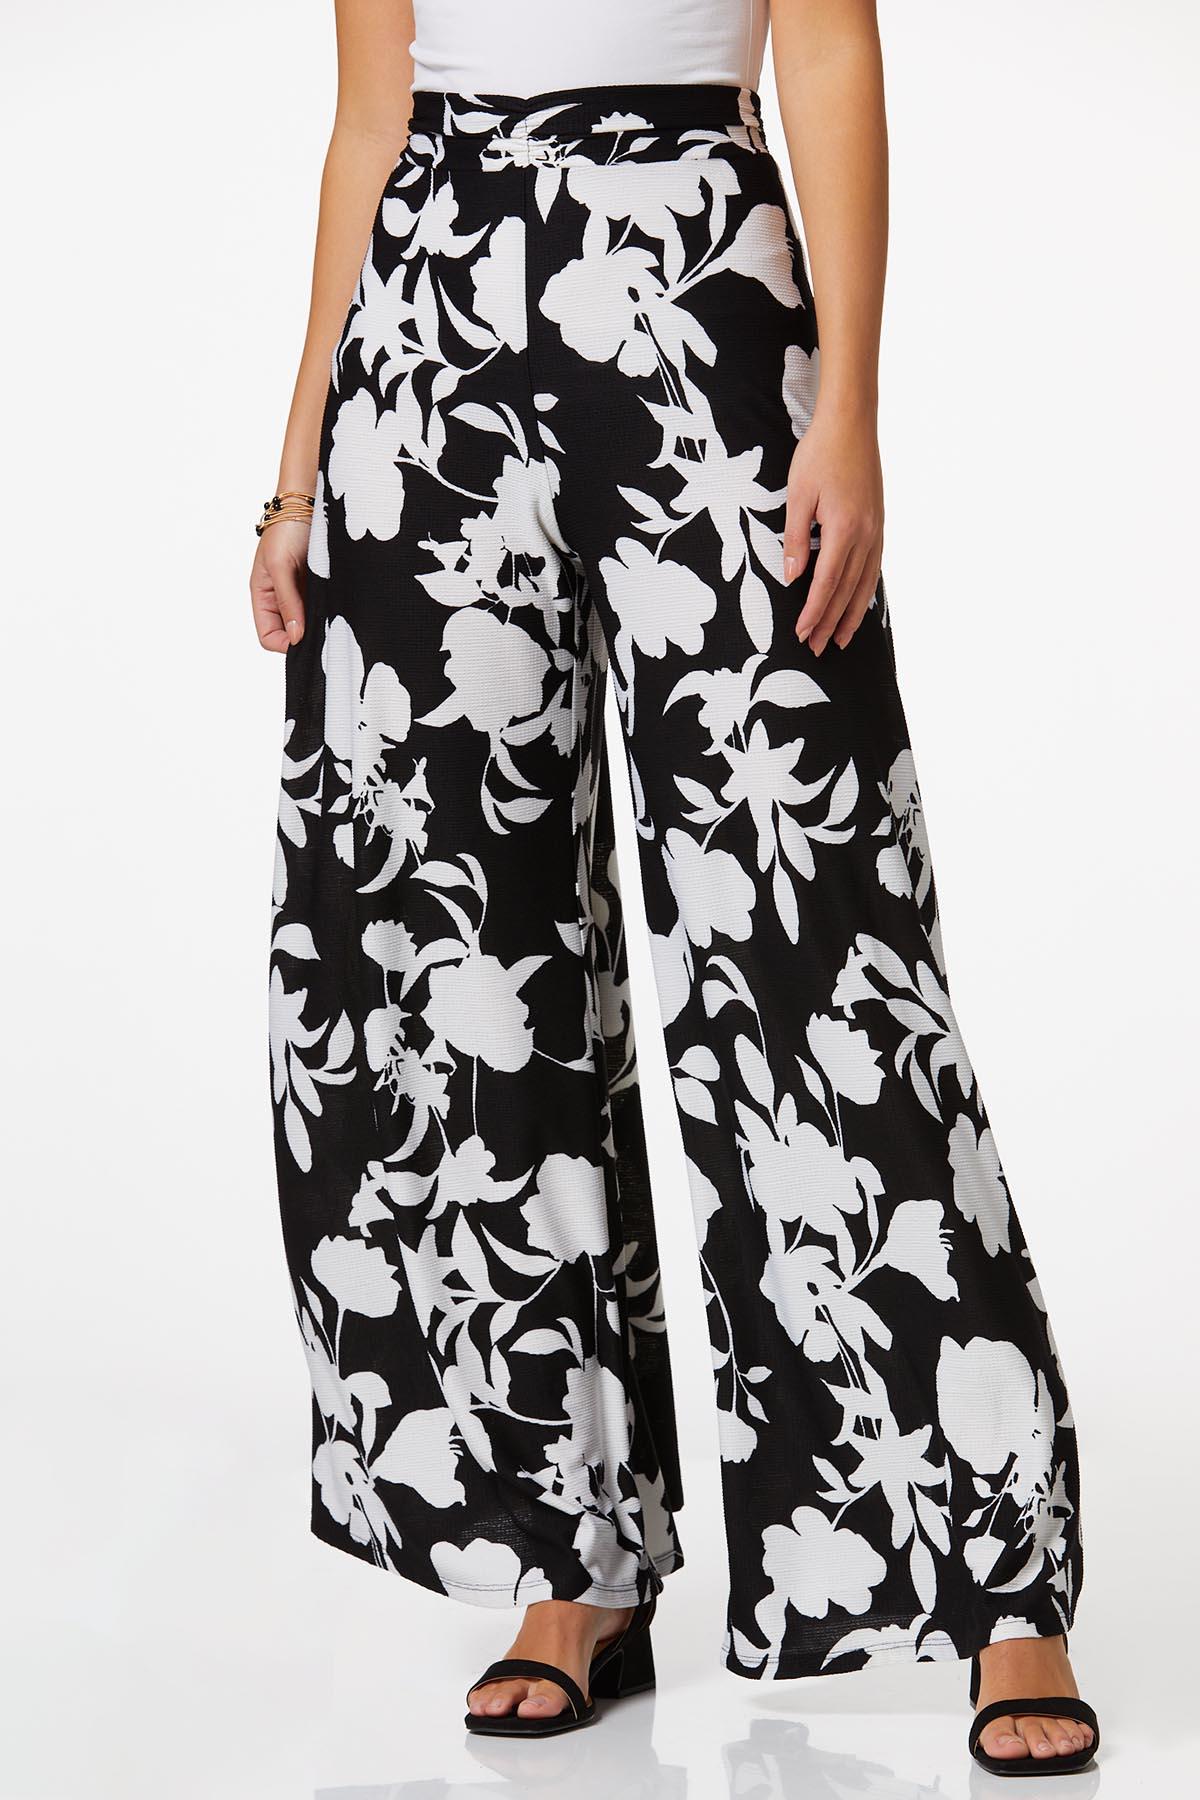 Cato Fashions  Cato Petite Textured Floral Wide Leg Pants